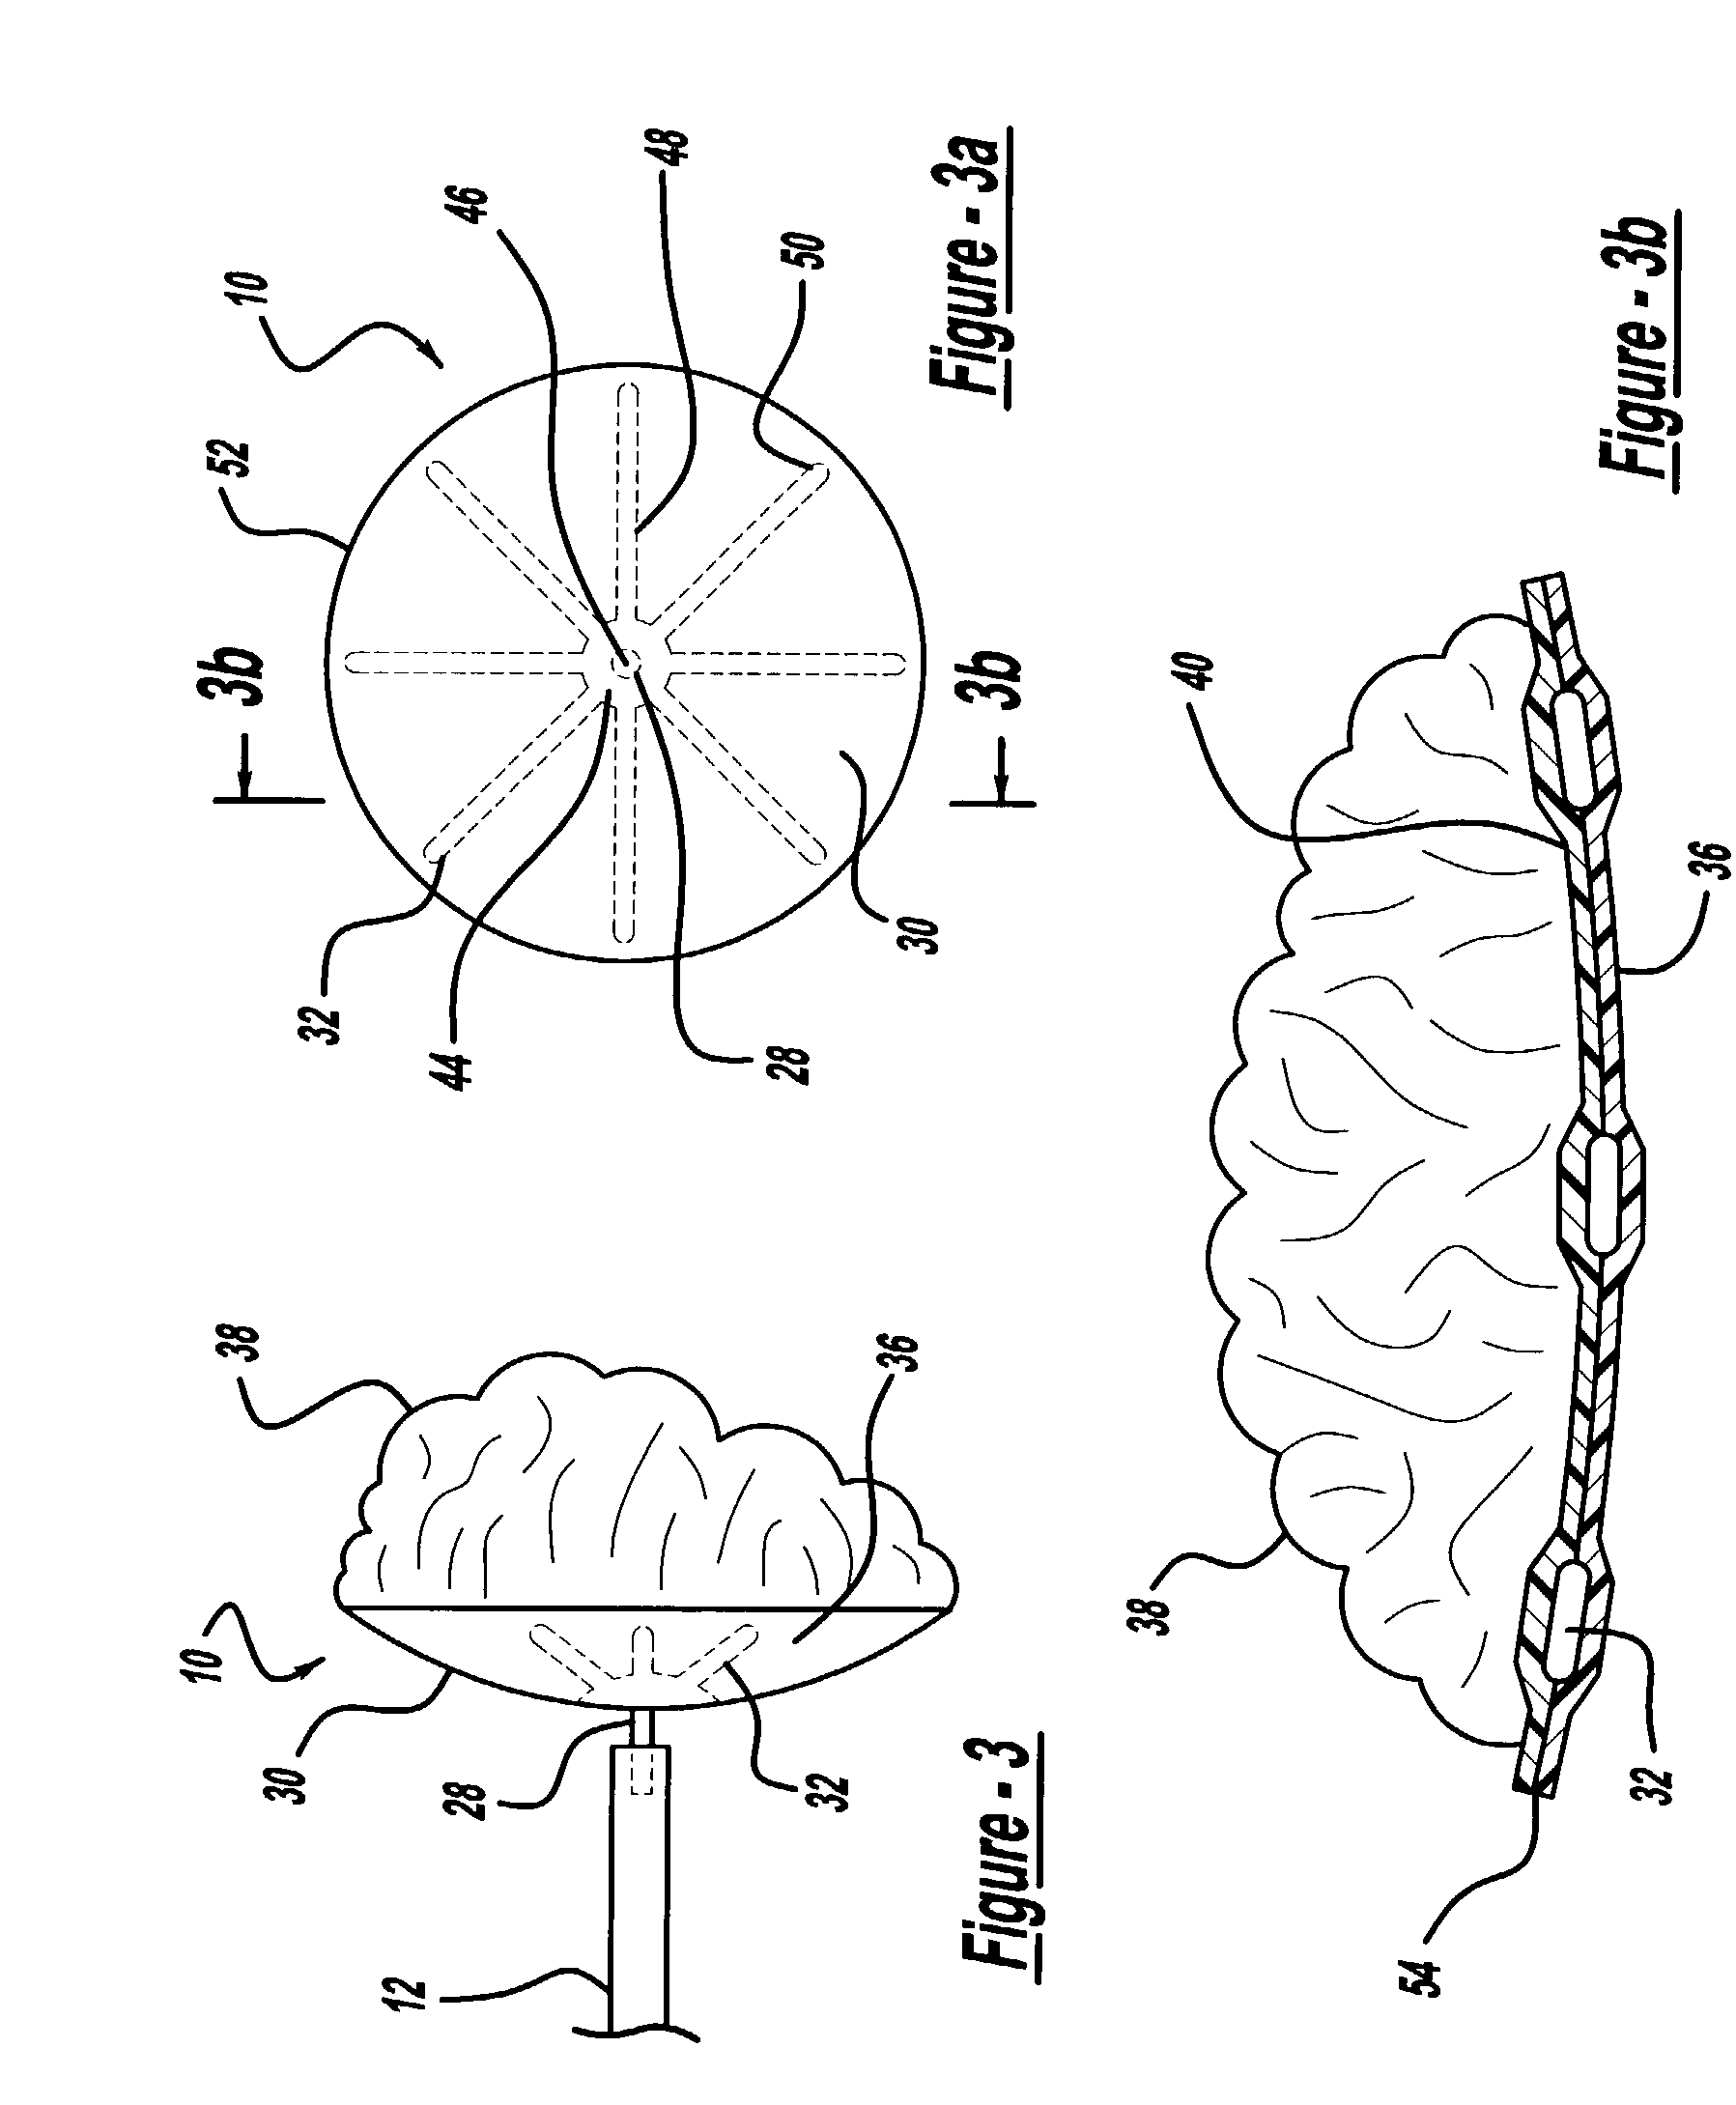 Aneurysm embolic device with an occlusive member